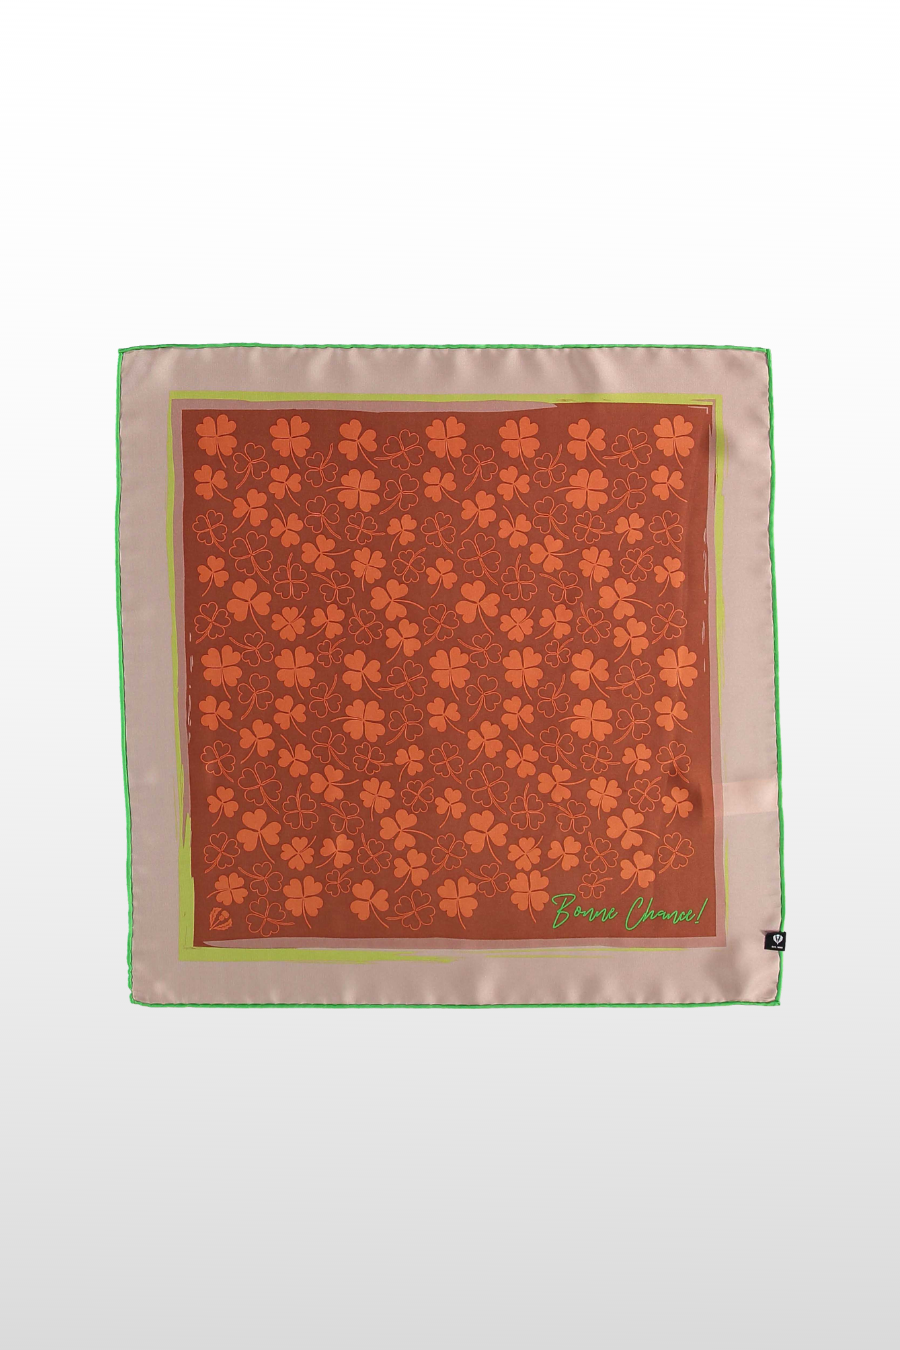 Bonne Chance Silk Square Neckie in Gift Box